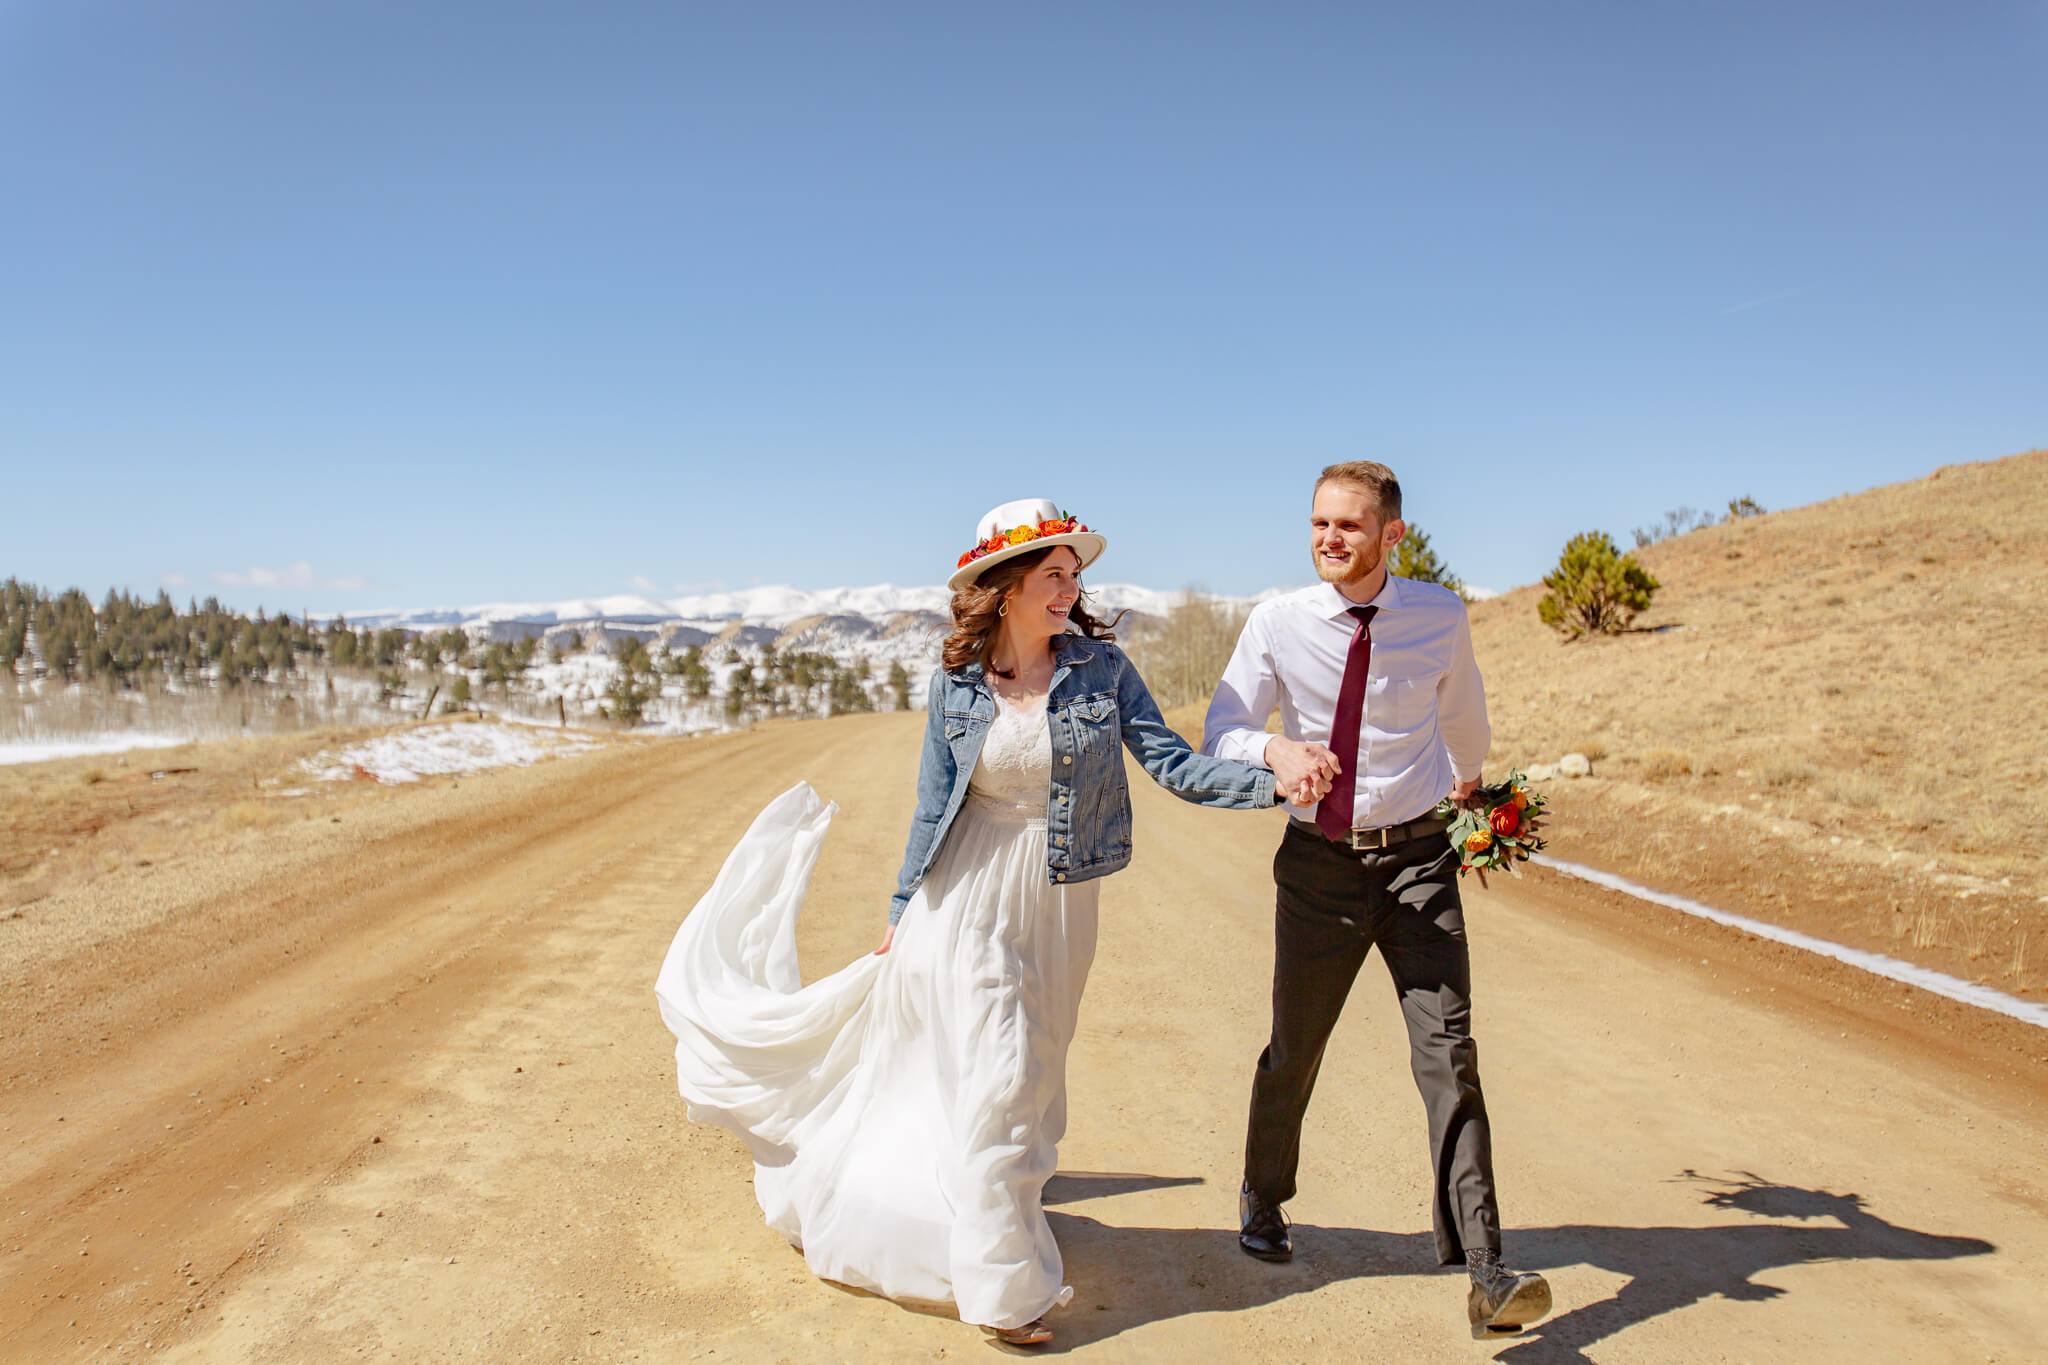 Couple holding hands and laughing on a dirt road.